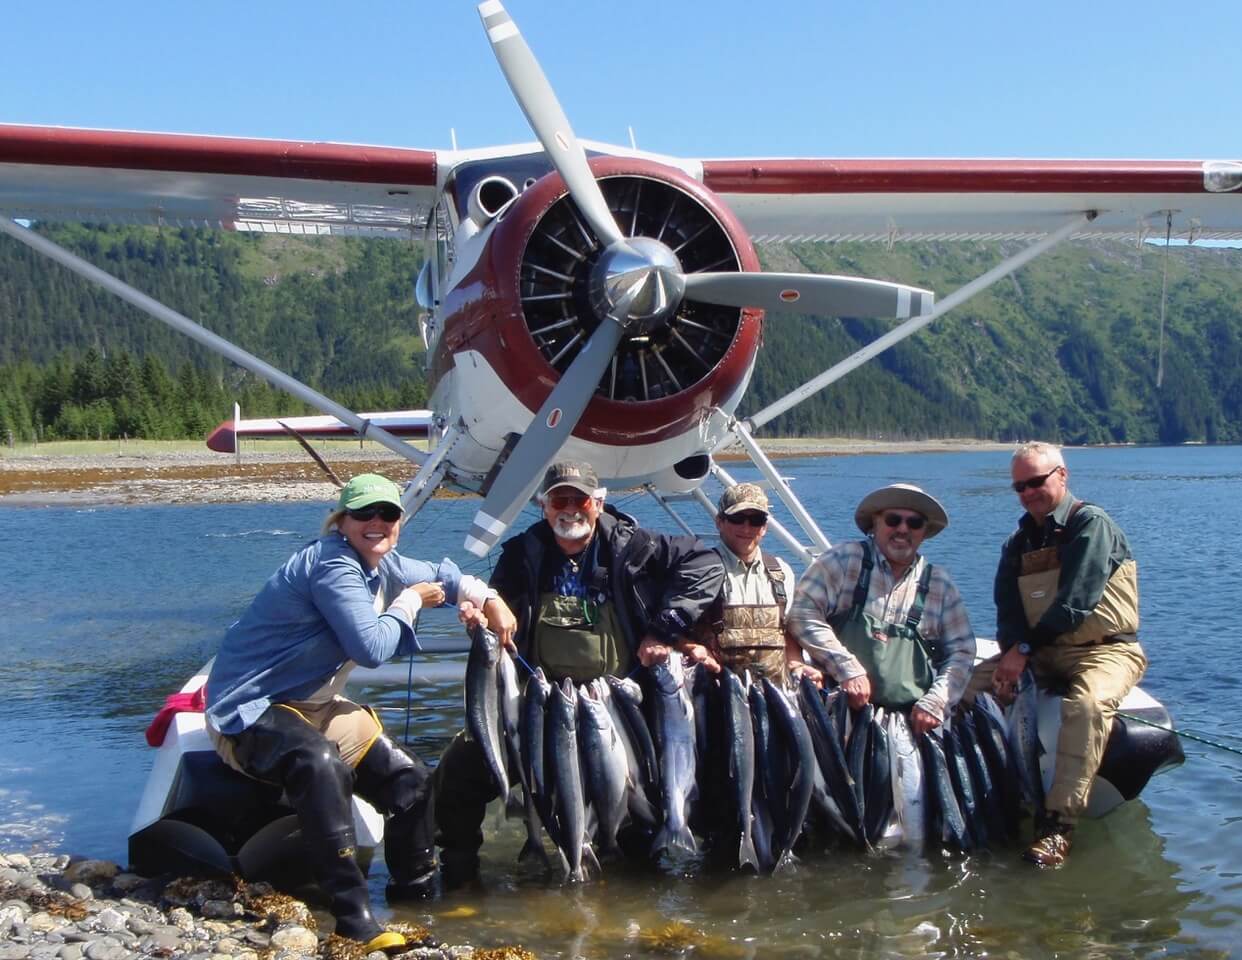 A group of anglers displaying their catch of silver salmon in front of the plane.